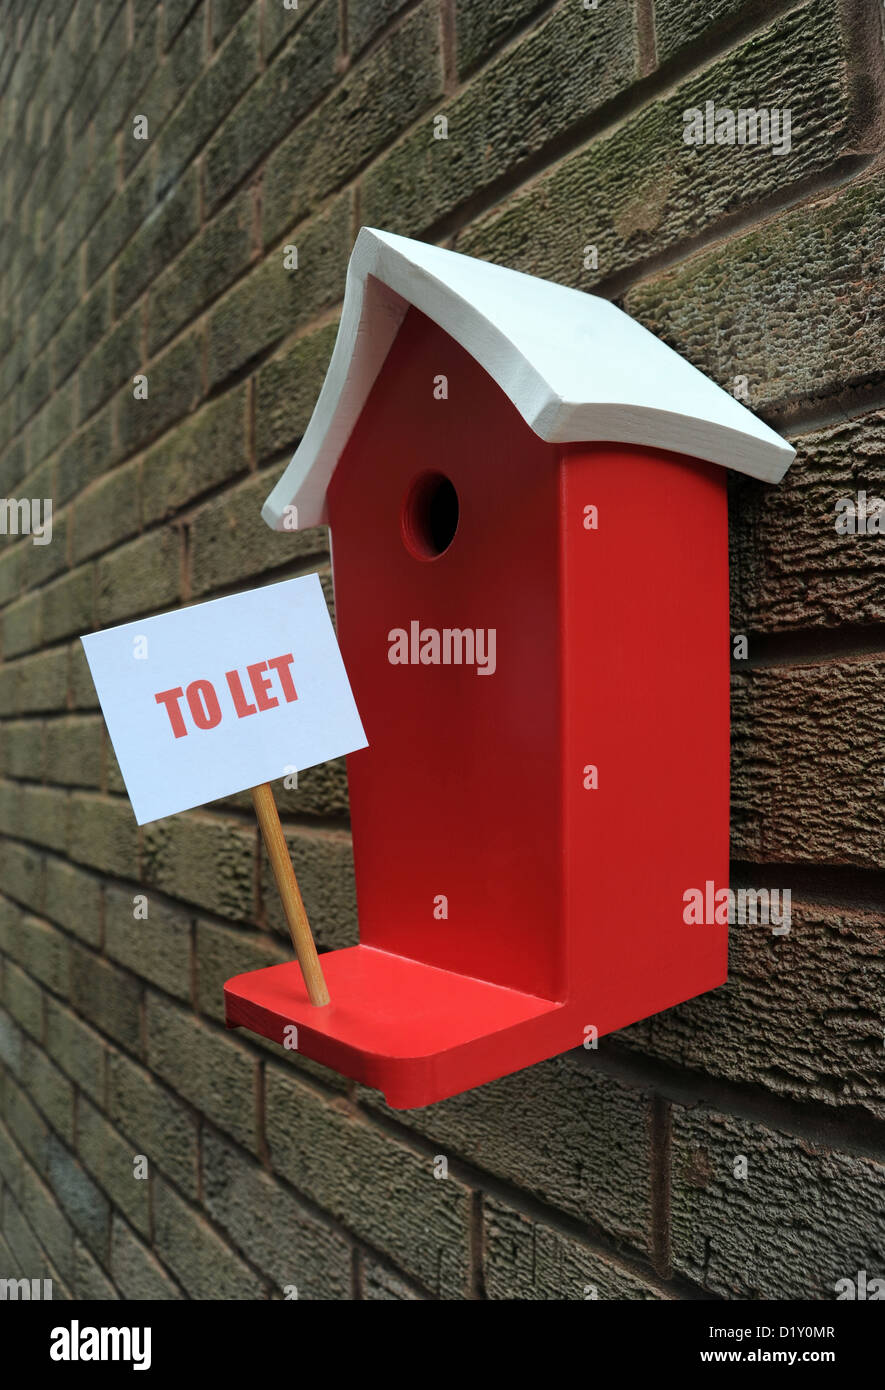 WALL MOUNTED BIRD BOX HOUSE WITH TO LET SIGN RE MOVING HOUSE MORTGAGES LOANS PRICES RENTS BUYING BUYERS THE ECONOMY RENTING UK Stock Photo